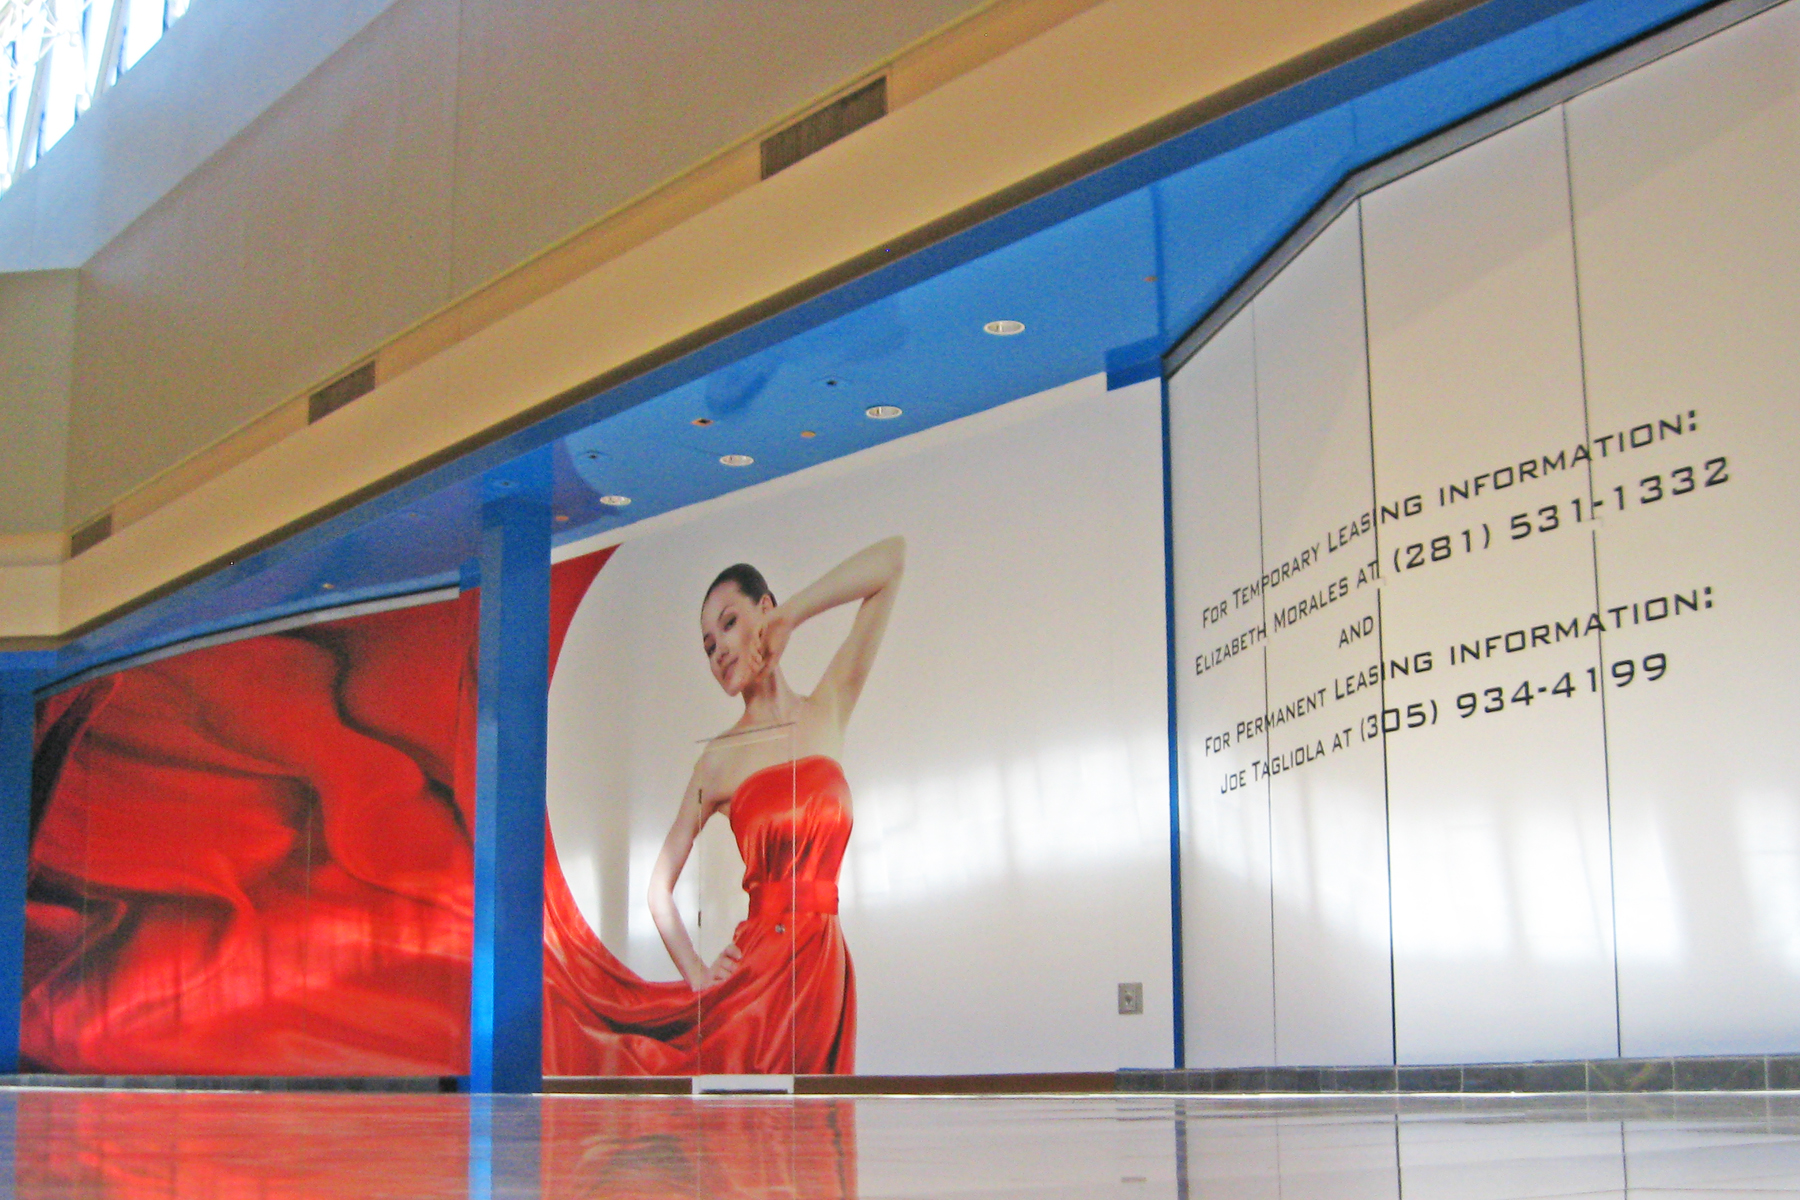  Malls using Giant Removable Wall Murals on Vacant Store Windows for Advertising and Leasing Promotions - Corlorful Window Graphics Enhance the Ambience Around Otherwise Empty Store Spaces